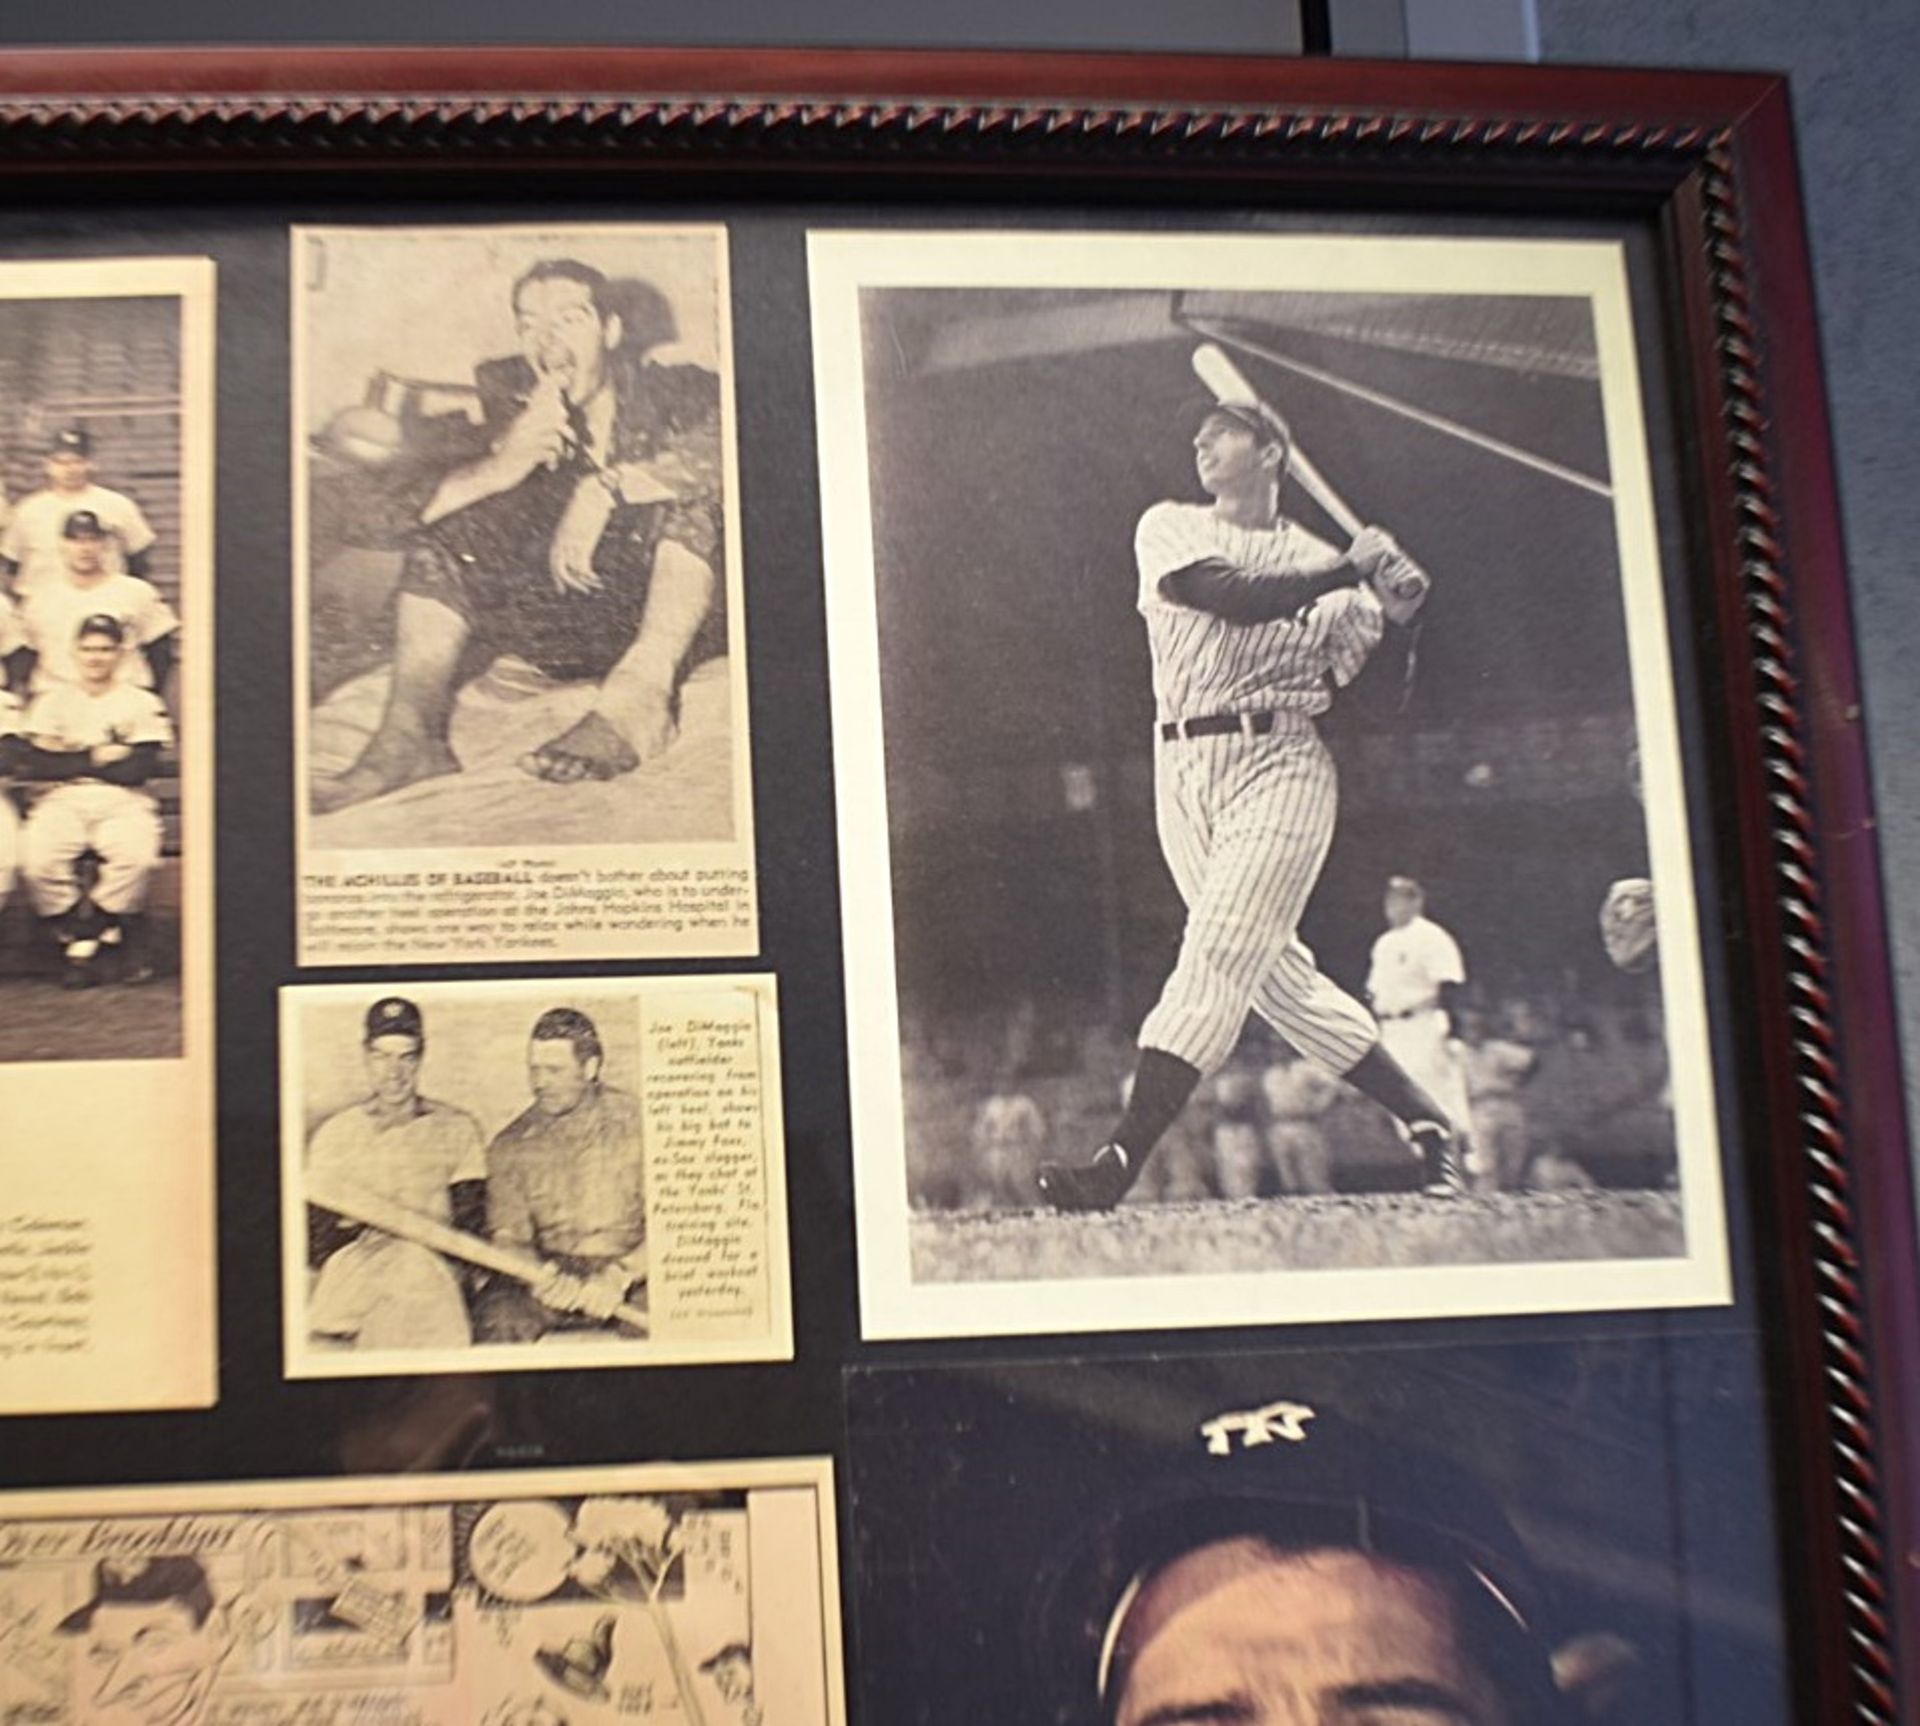 1 x Large Framed Montage Featuring American Sportsmen - From a Popular American Diner - Image 3 of 5